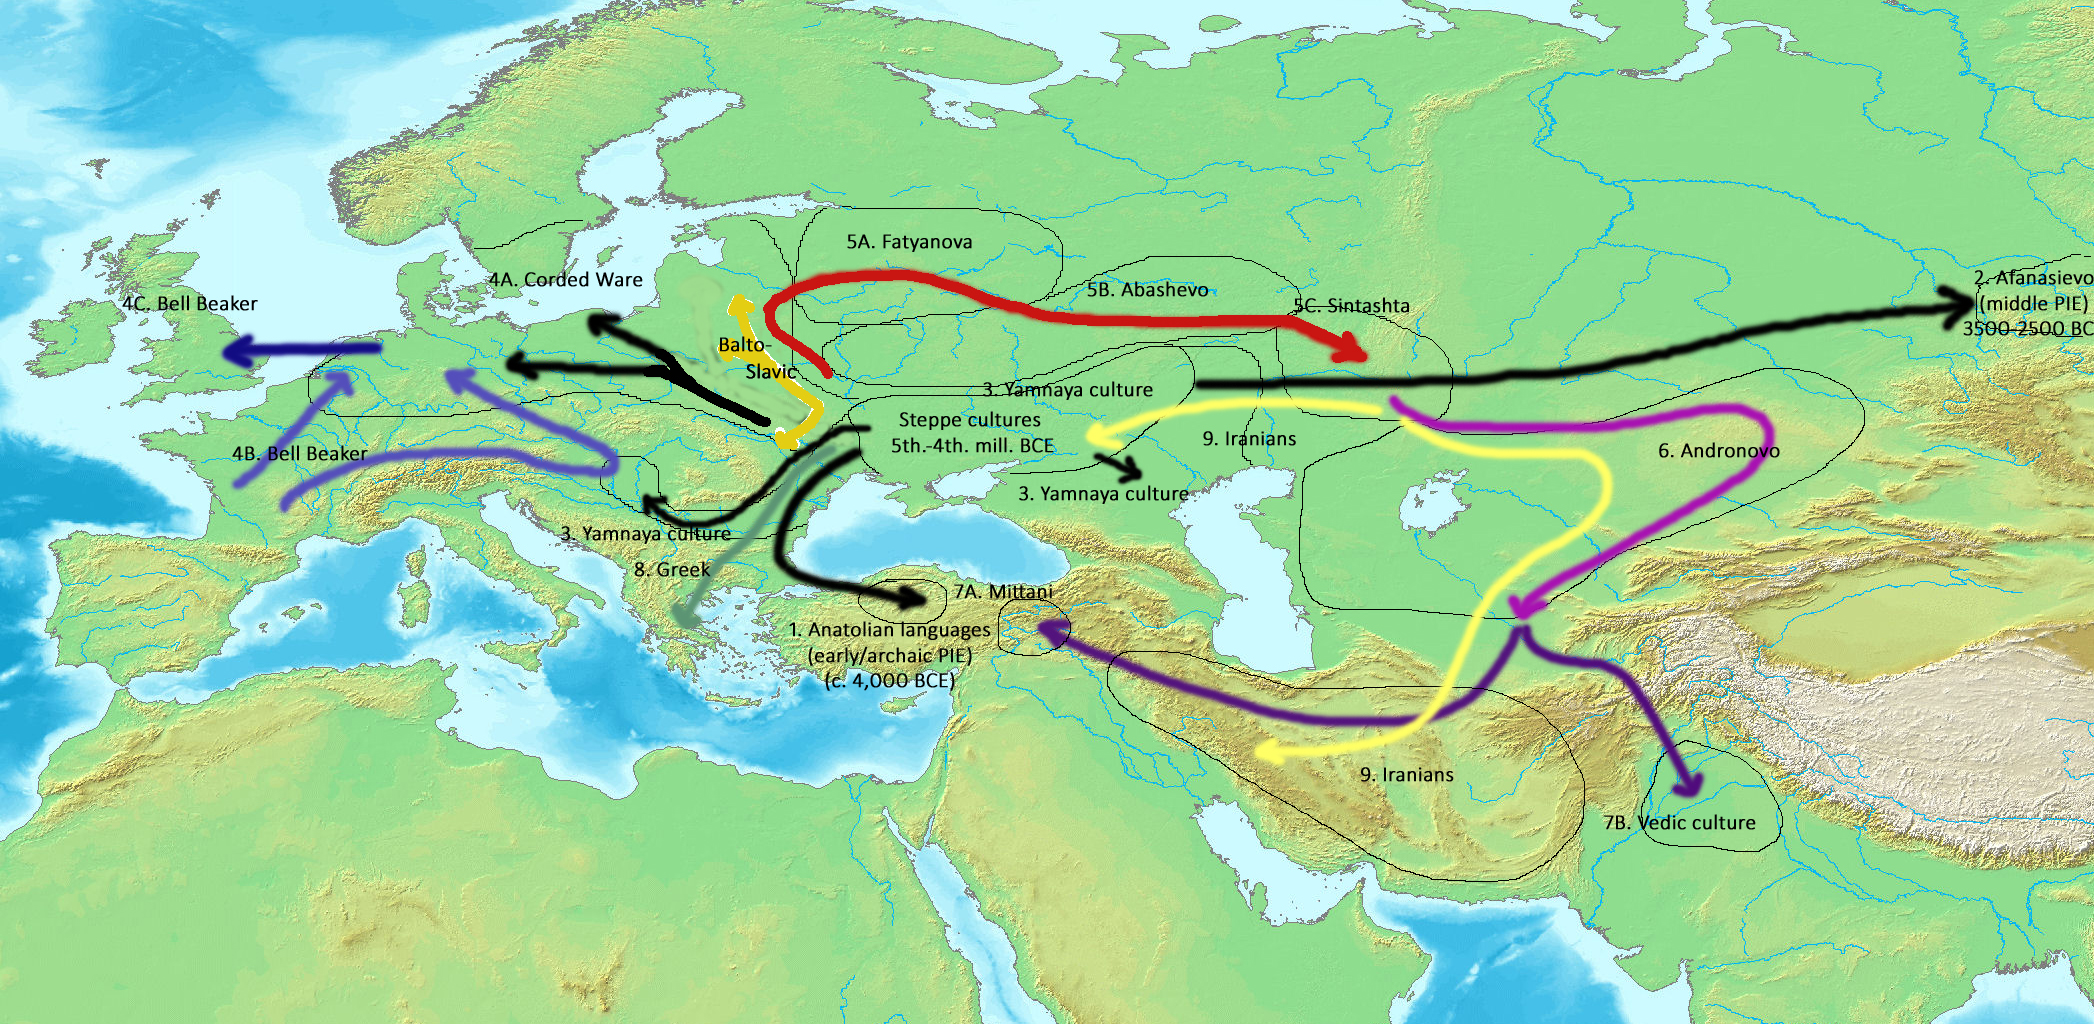 Scheme of Indo-European language dispersals from c. 4000 to 1000 BCE. (Image: Wikipedia, Joshua Jonathan, CC BY-SA 4.0)